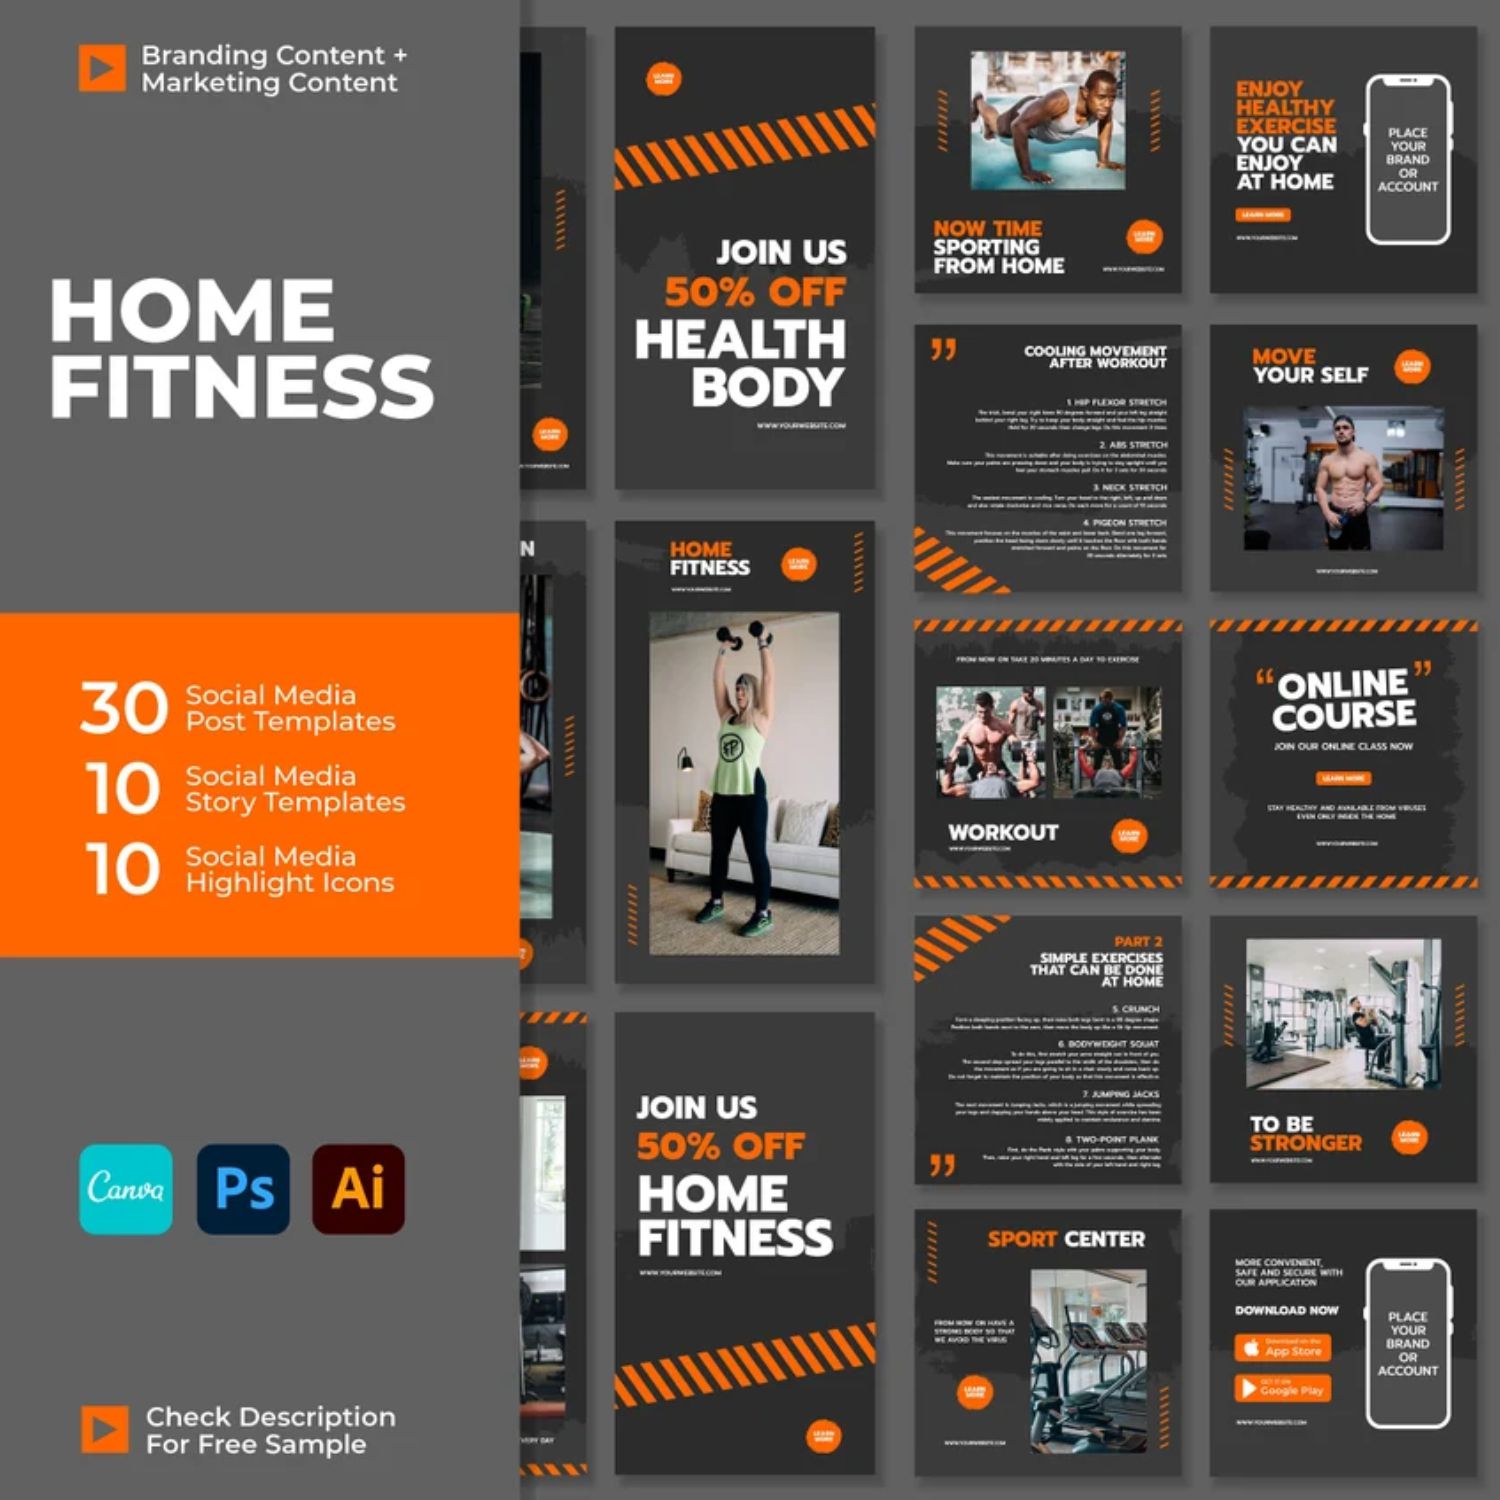 Home Fitness Story and Icon Social Media Template Canva Photoshop Illustrator Cover Image.